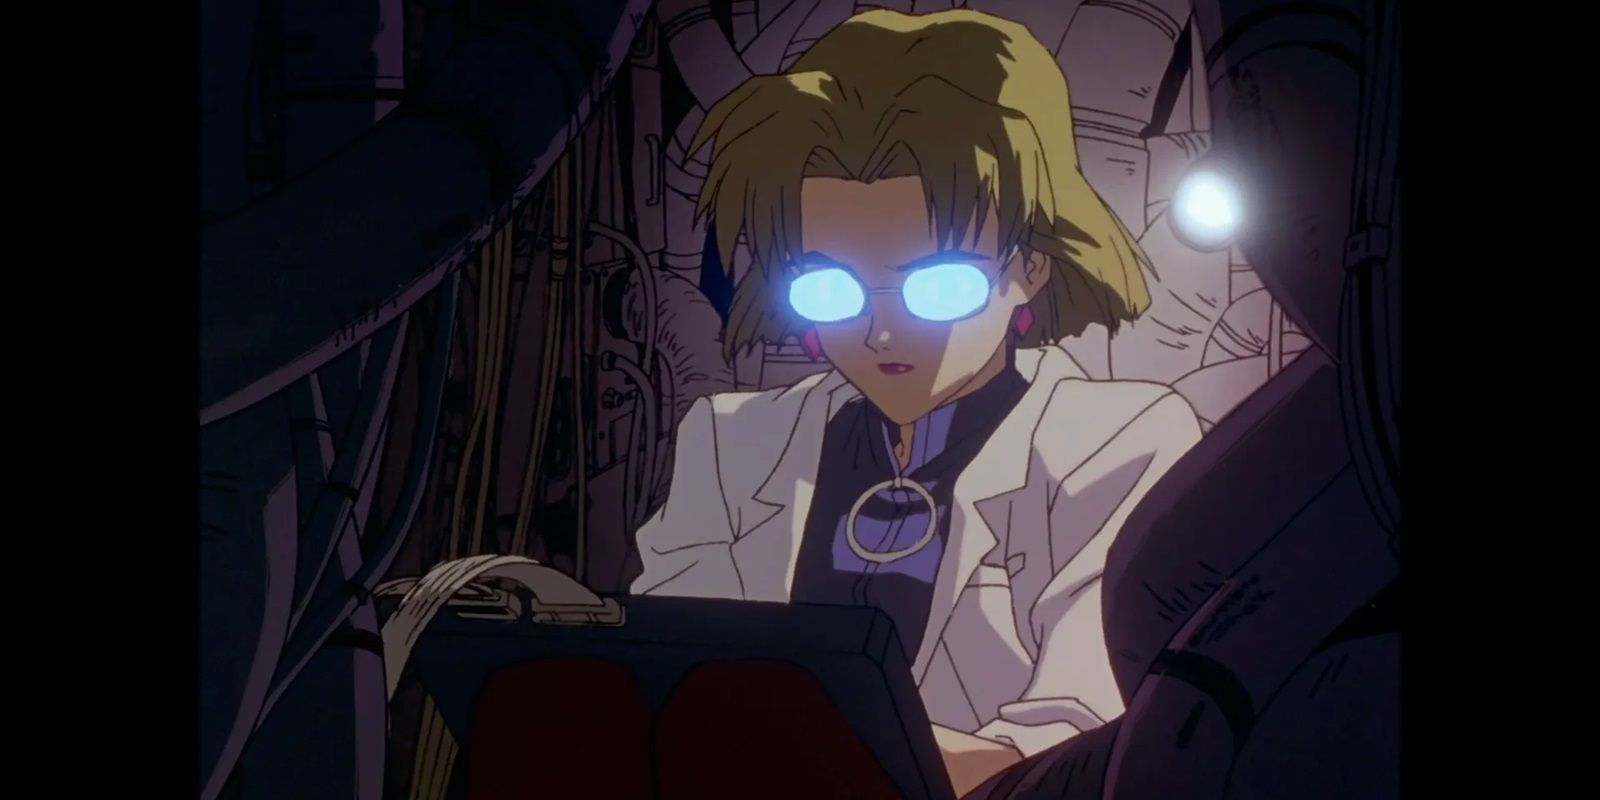 Ritsuko from the Evangelion anime typing while working on the Magi